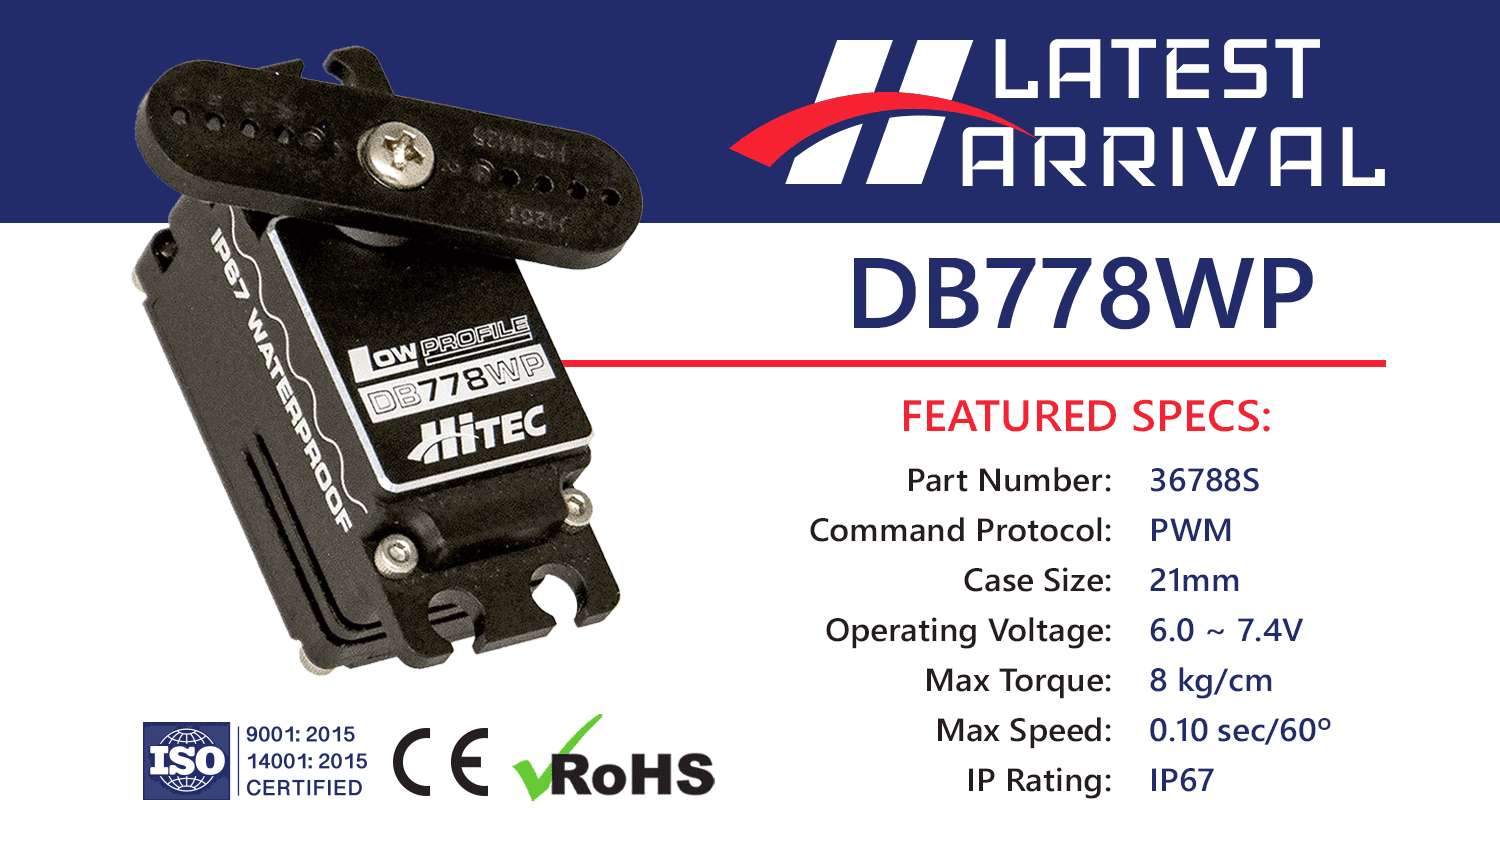 PRODUCT RELEASE: DB778WP